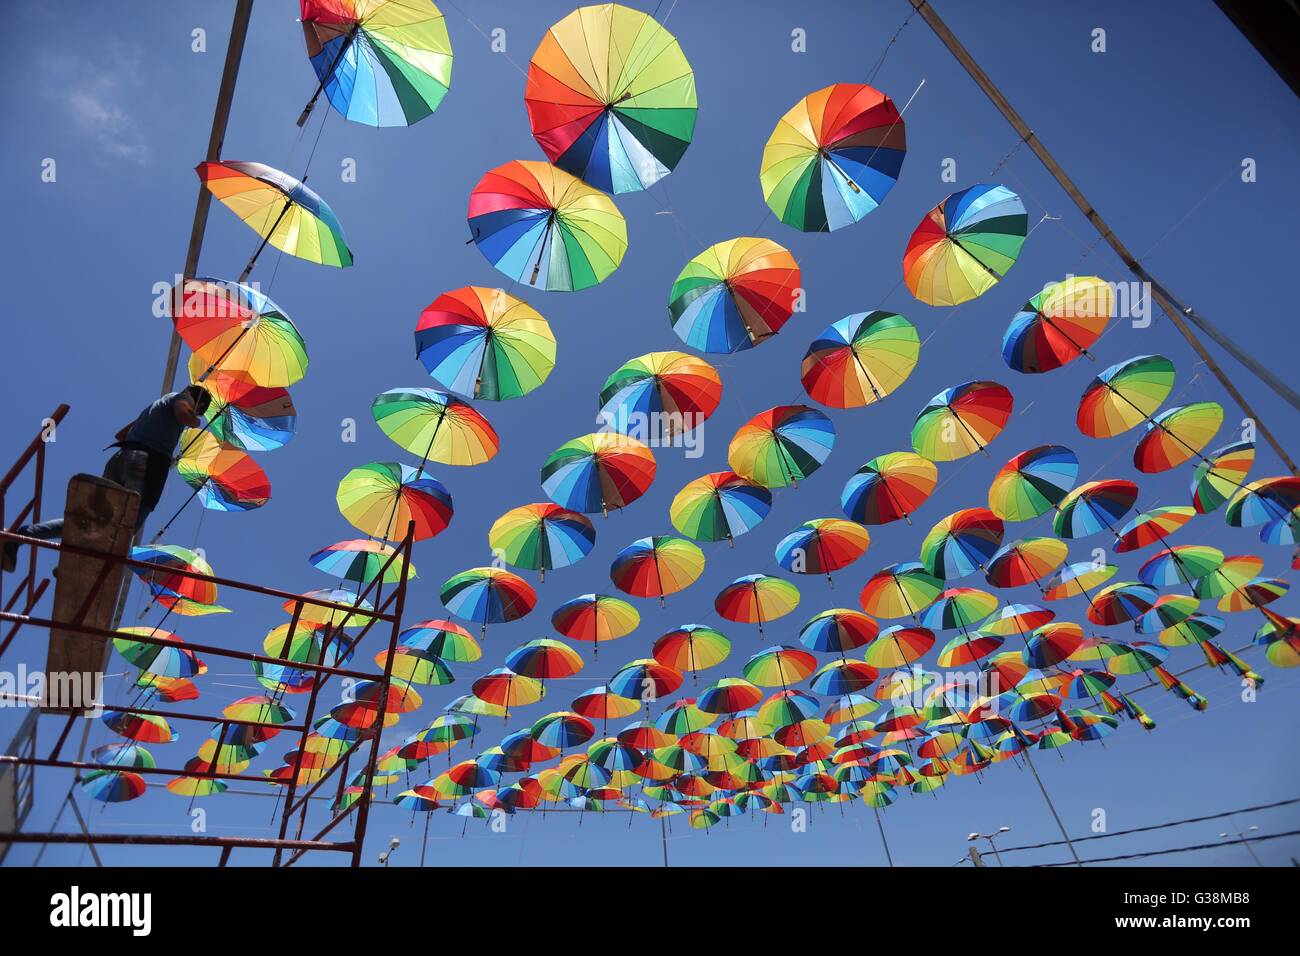 Gaza City, Gaza Strip, Palestinian Territory. 9th June, 2016. A Palestinian worker of a beachside café shop decorates its terrace with hanging colourful umbrellas as part of decorations for the Muslim holy fasting month of Ramadan in Gaza City, on June 9, 2016. Ramadan is sacred to Muslims because it is during that month that tradition says the Koran was revealed to the Prophet Mohammed. The fast is one of the five main religious obligations under Islam. More than 1. Credit:  ZUMA Press, Inc./Alamy Live News Stock Photo